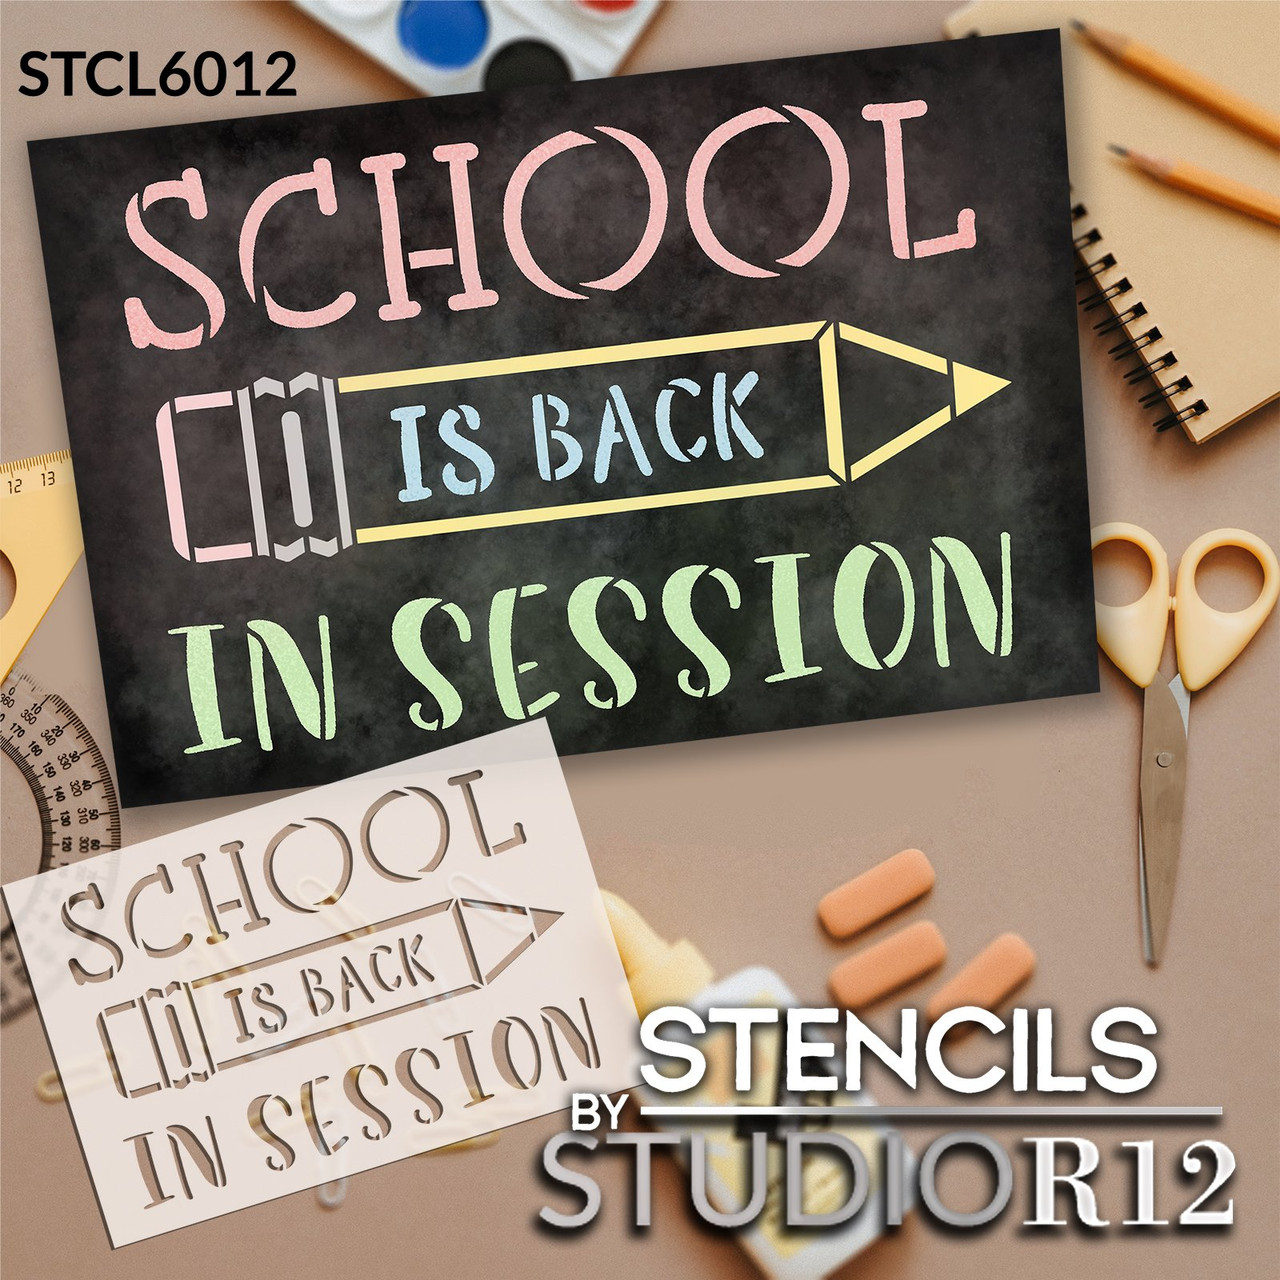 School is Back in Session Stencil by StudioR12 | Craft DIY Classroom Decor | Paint Wood Sign | Reusable Mylar Template | Select Size